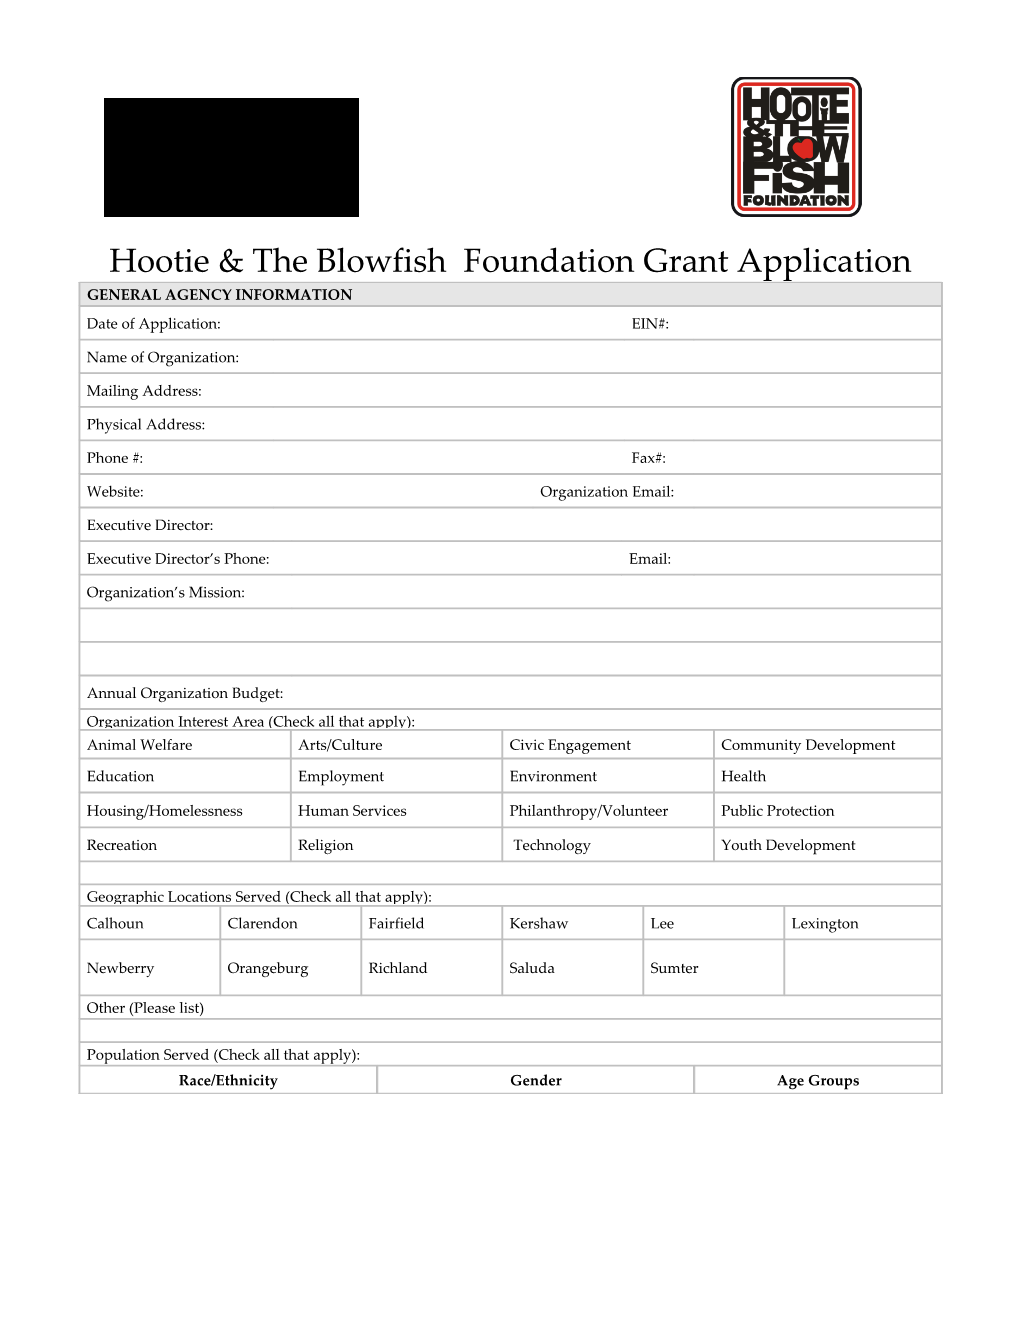 Hootie & the Blowfish Foundation Grant Application